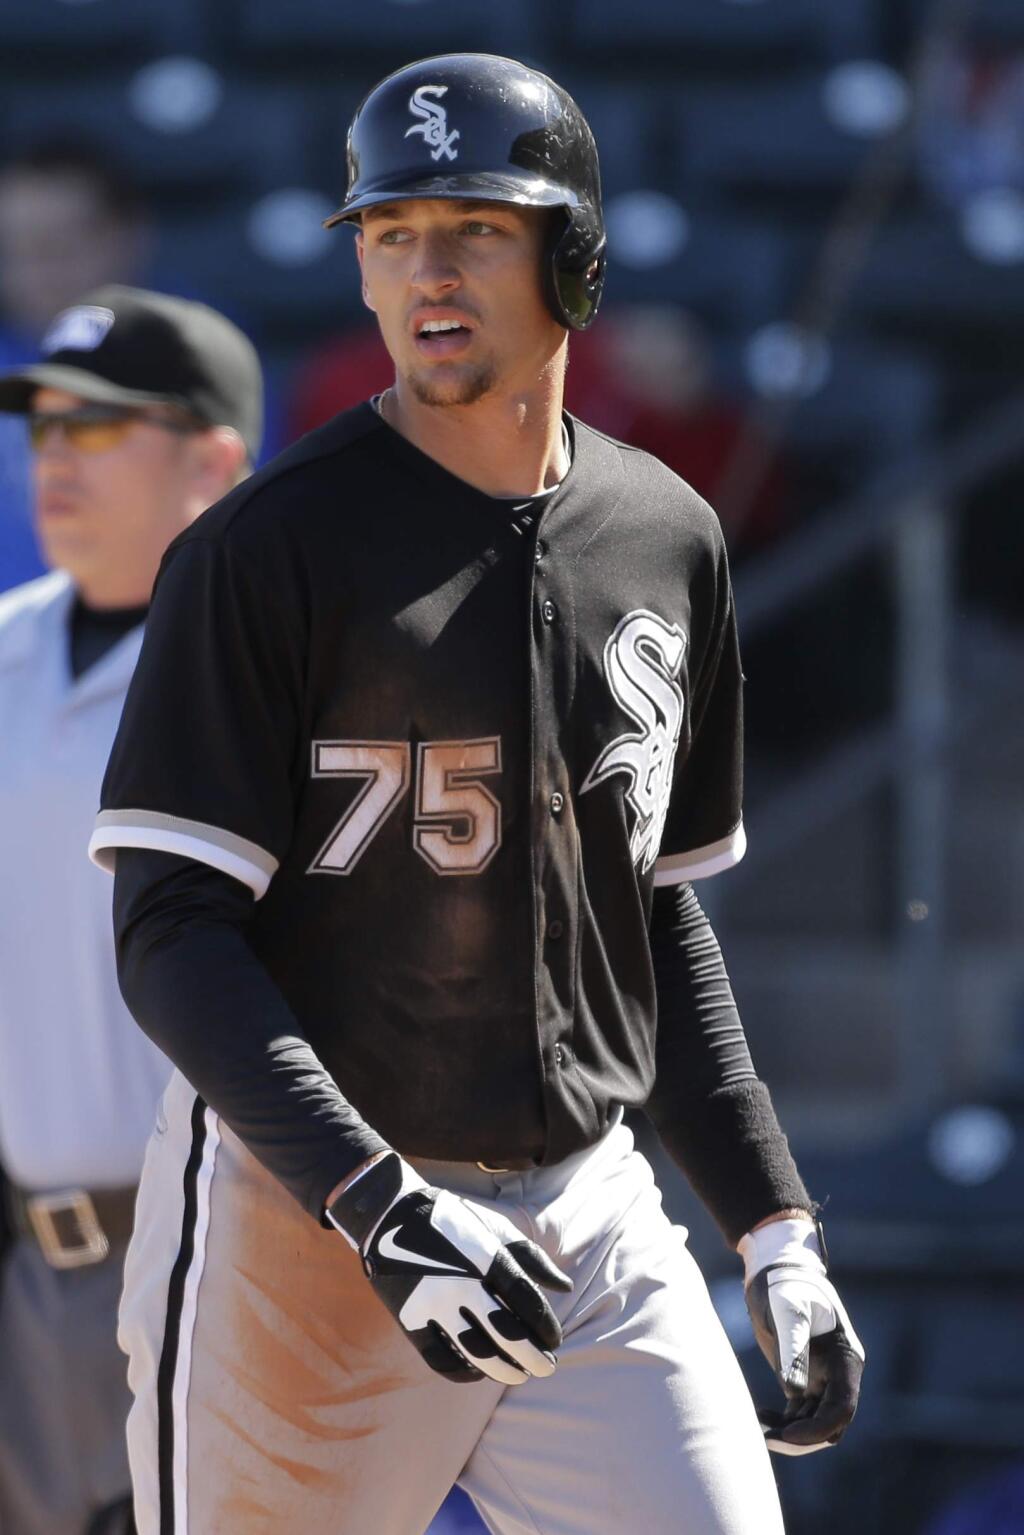 Chicago White Sox's Trayce Thompson walks back to the dugout after scoring during an exhibition spring training baseball game against the Texas Rangers Tuesday, Feb. 26, 2013, in Surprise, Ariz. (AP Photo/Charlie Riedel)